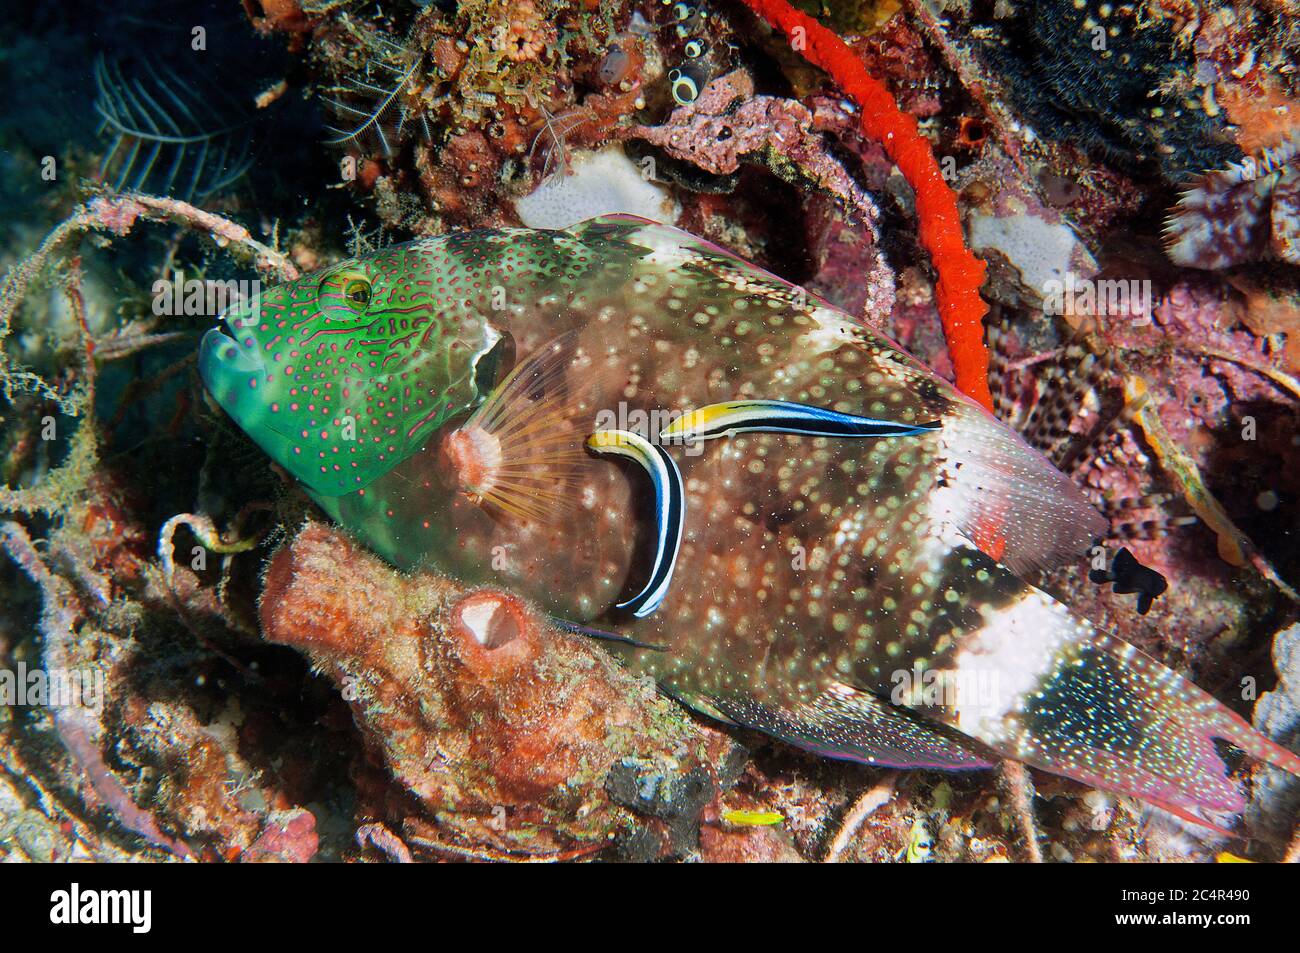 Floral wrasse, Cheilinus chlorourus, being cleaned by two bluestreak cleaner wrasses, Labroides dimidiatus, Mabul Kapalai, Malaysia Stock Photo